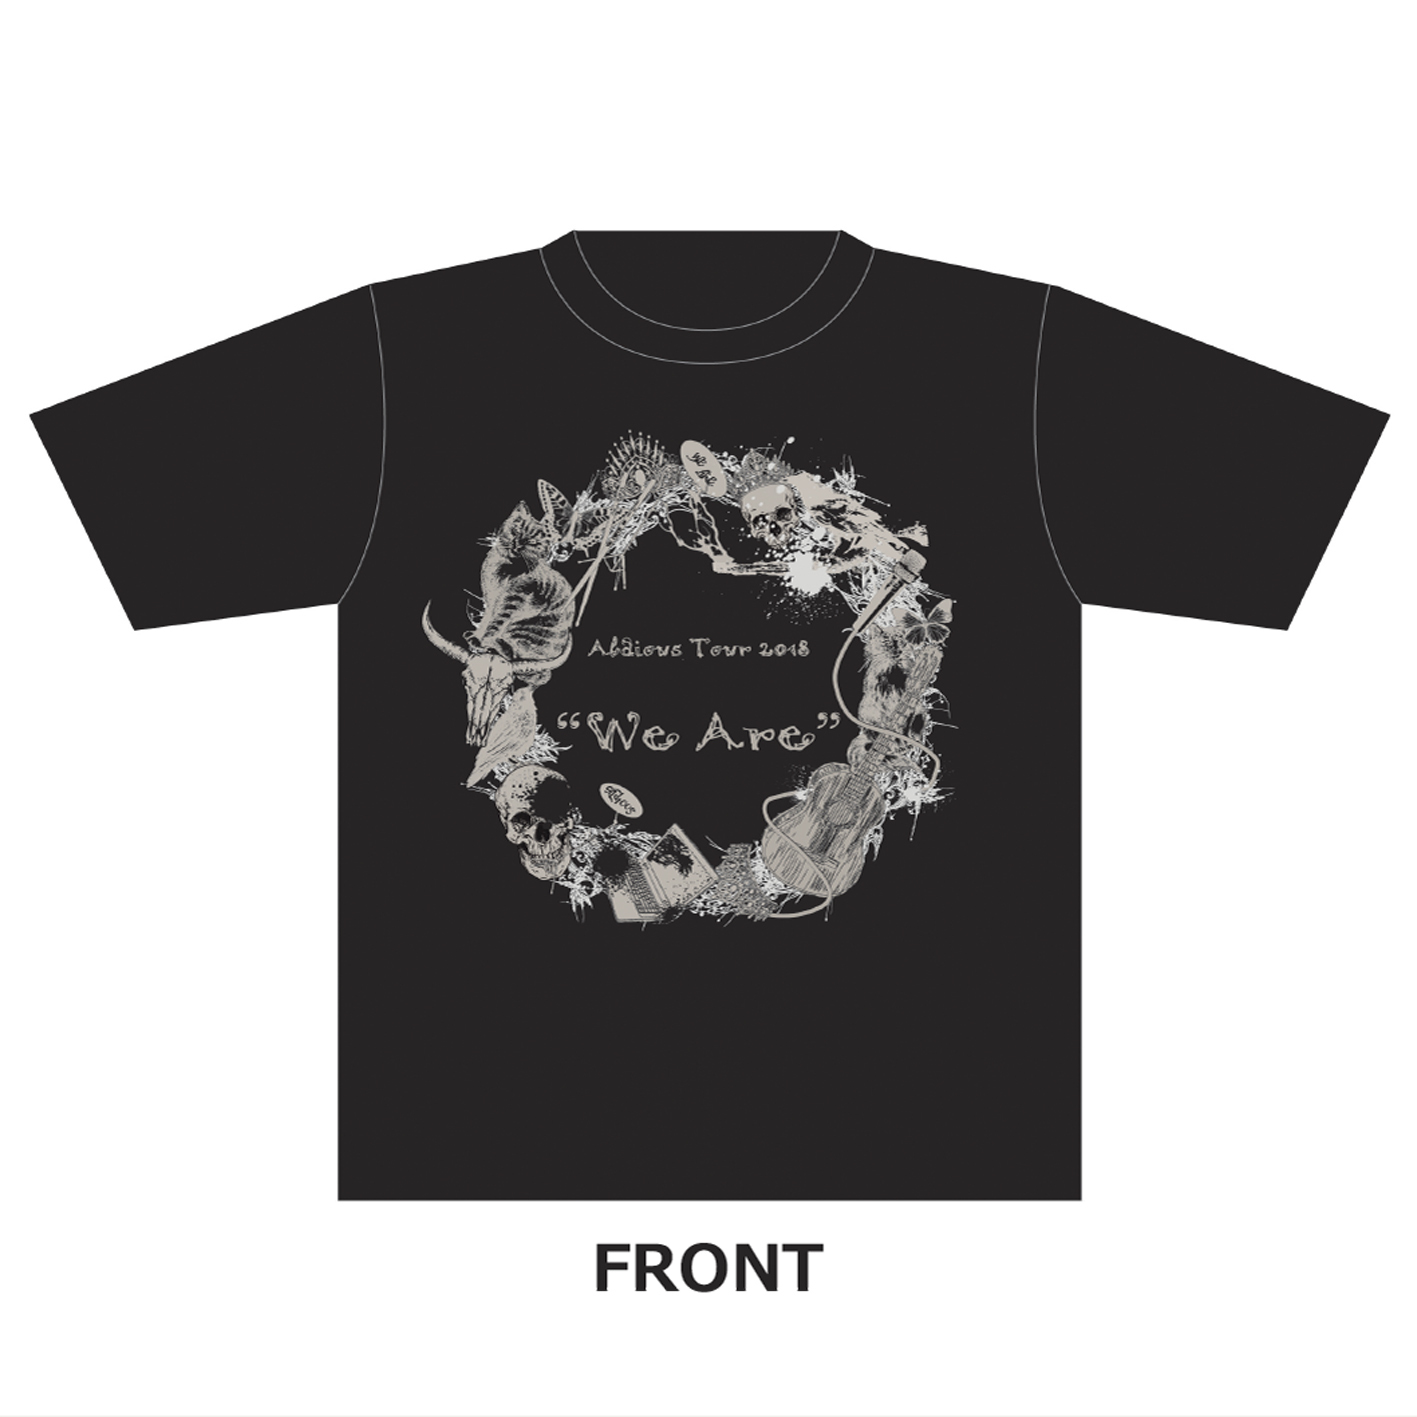 【sale!!!】“We Are” ツアーTシャツ